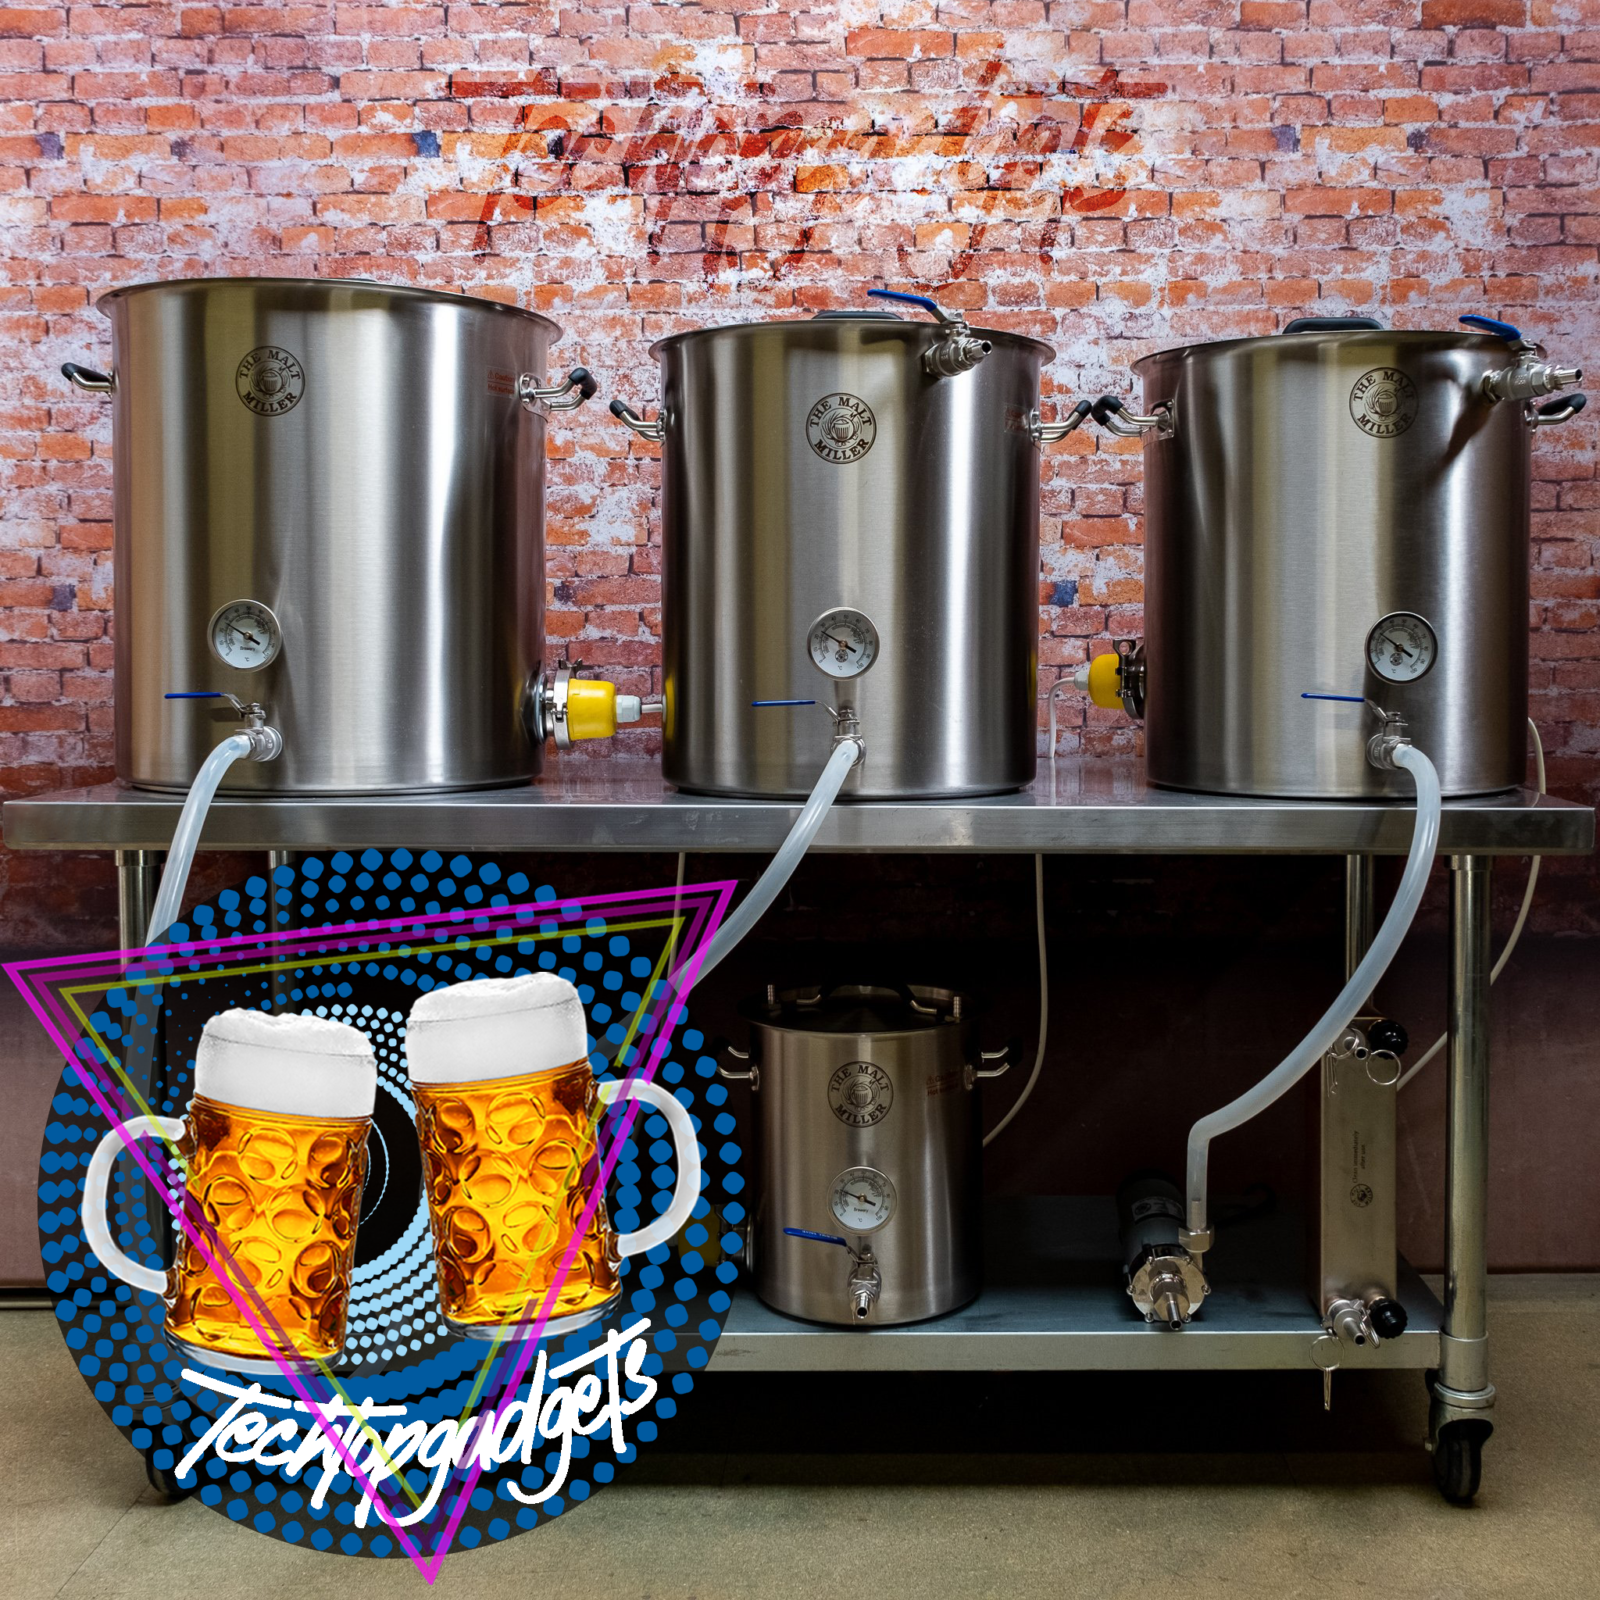 A selection of the best electric beer brewing systems displayed against a brick backdrop, highlighting the variety and quality available to brewers.